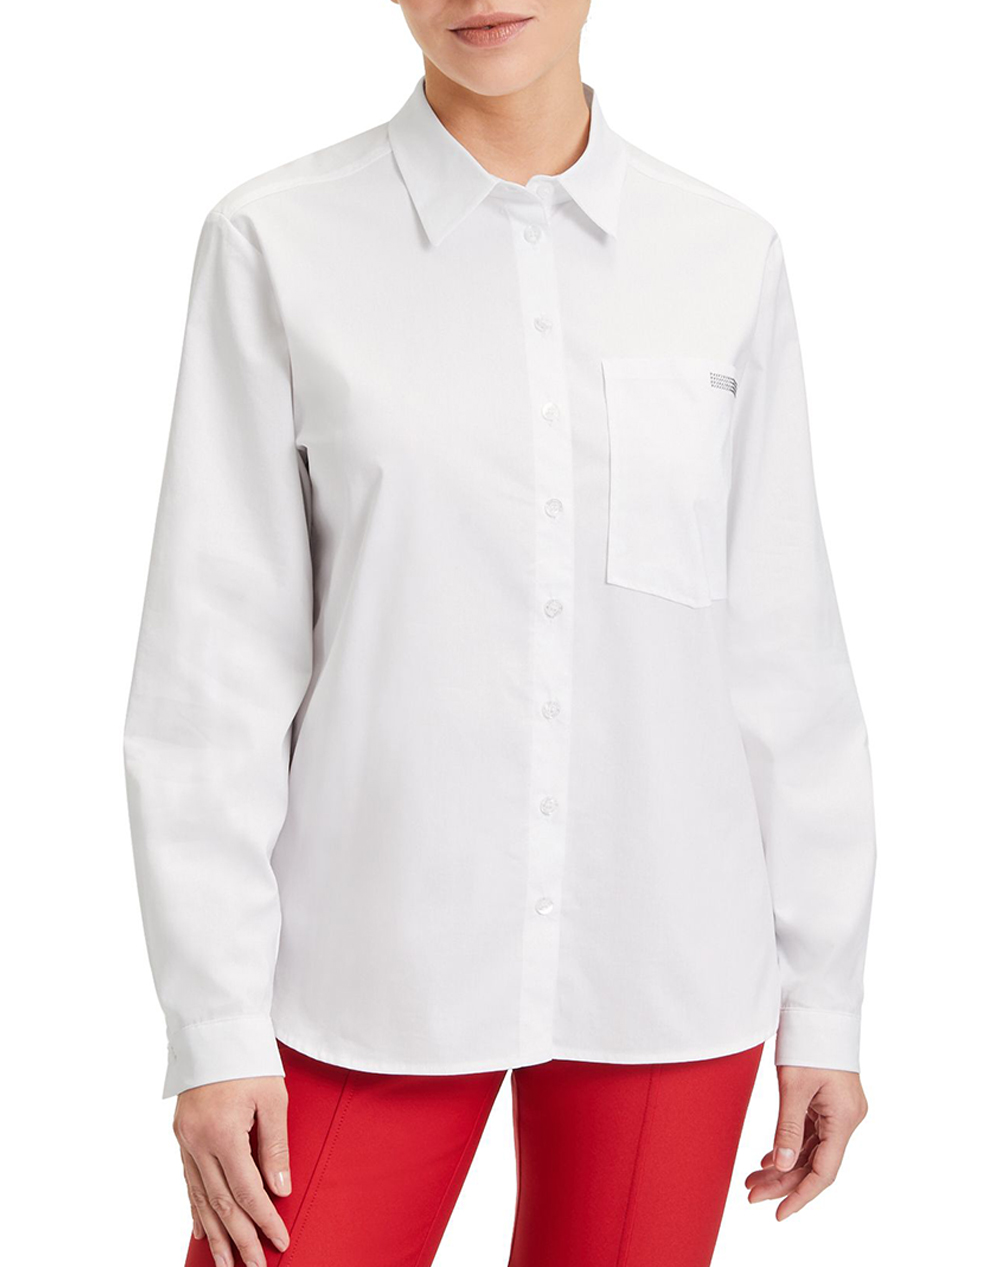 BETTY BARCLAY Bluse 8653/9555-1000 White